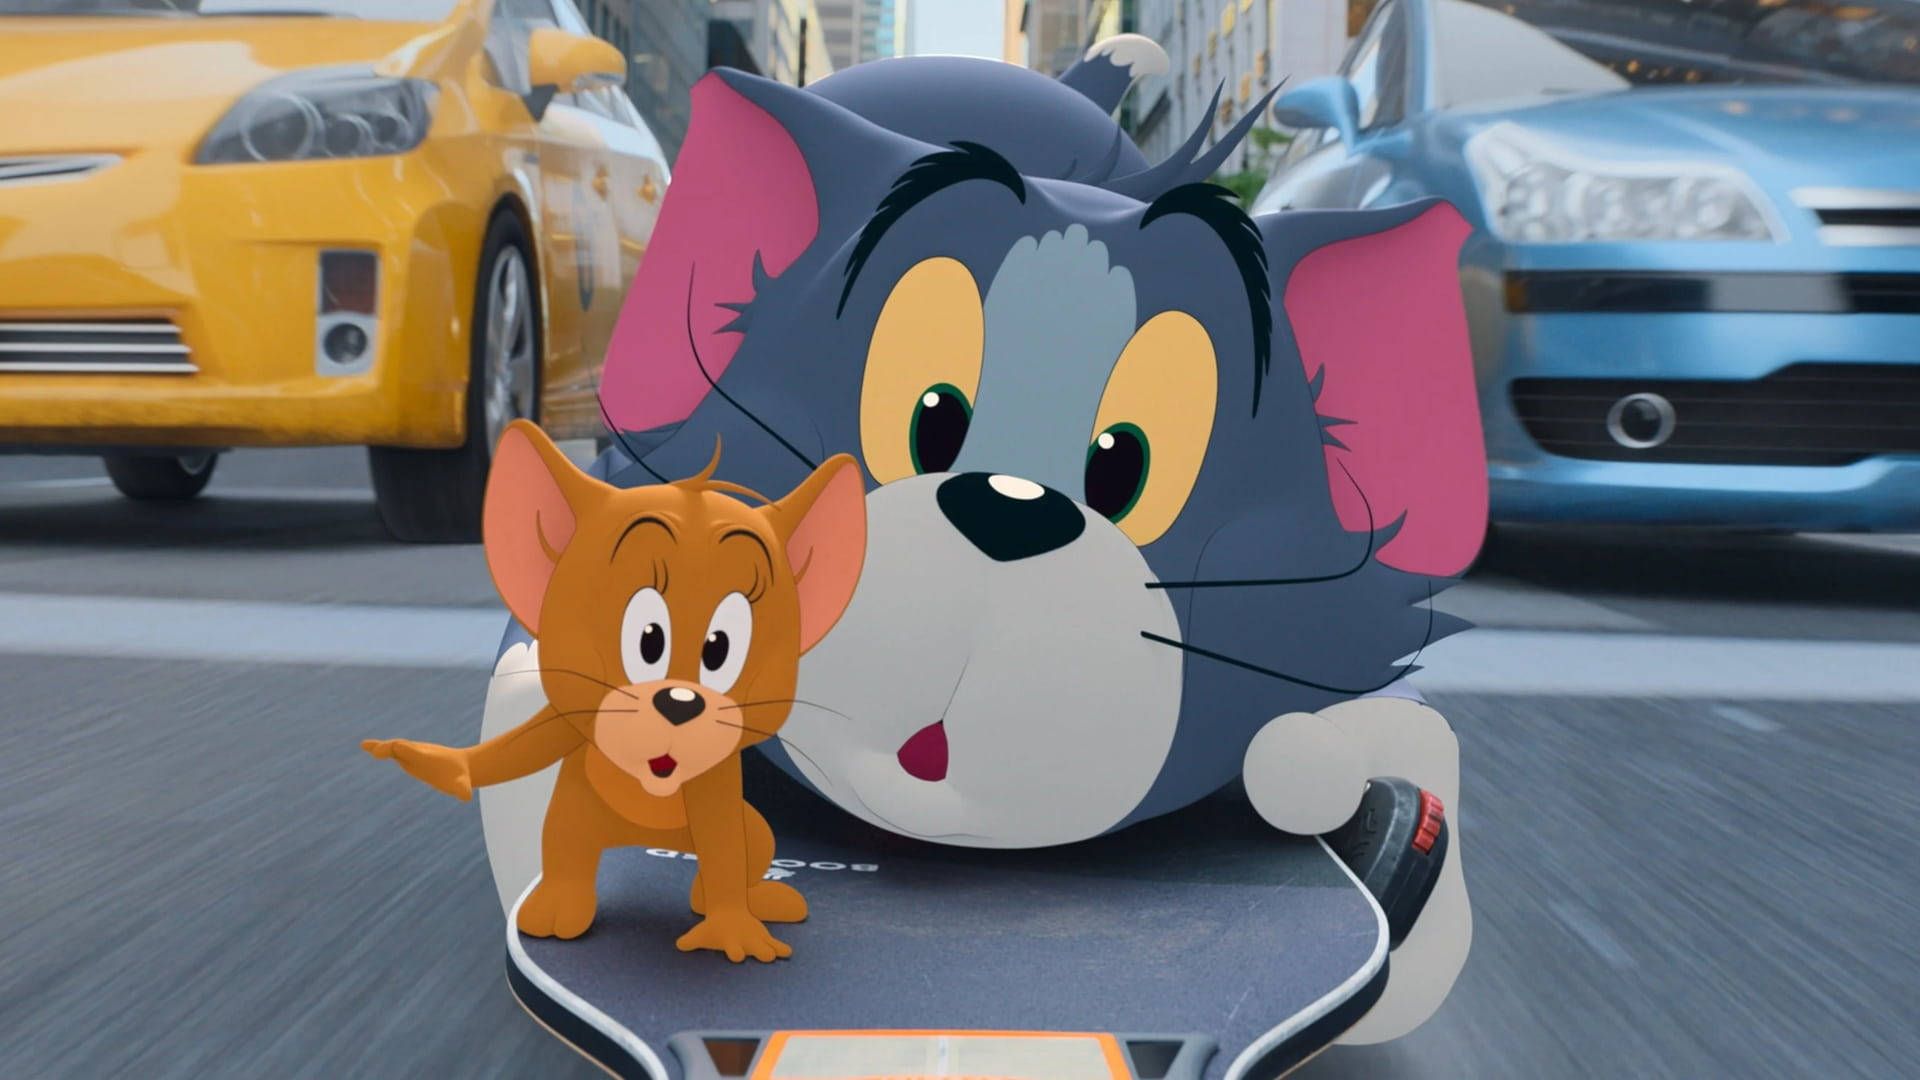 Tom and Jerry are on a scooter in the middle of a busy street. - Tom and Jerry